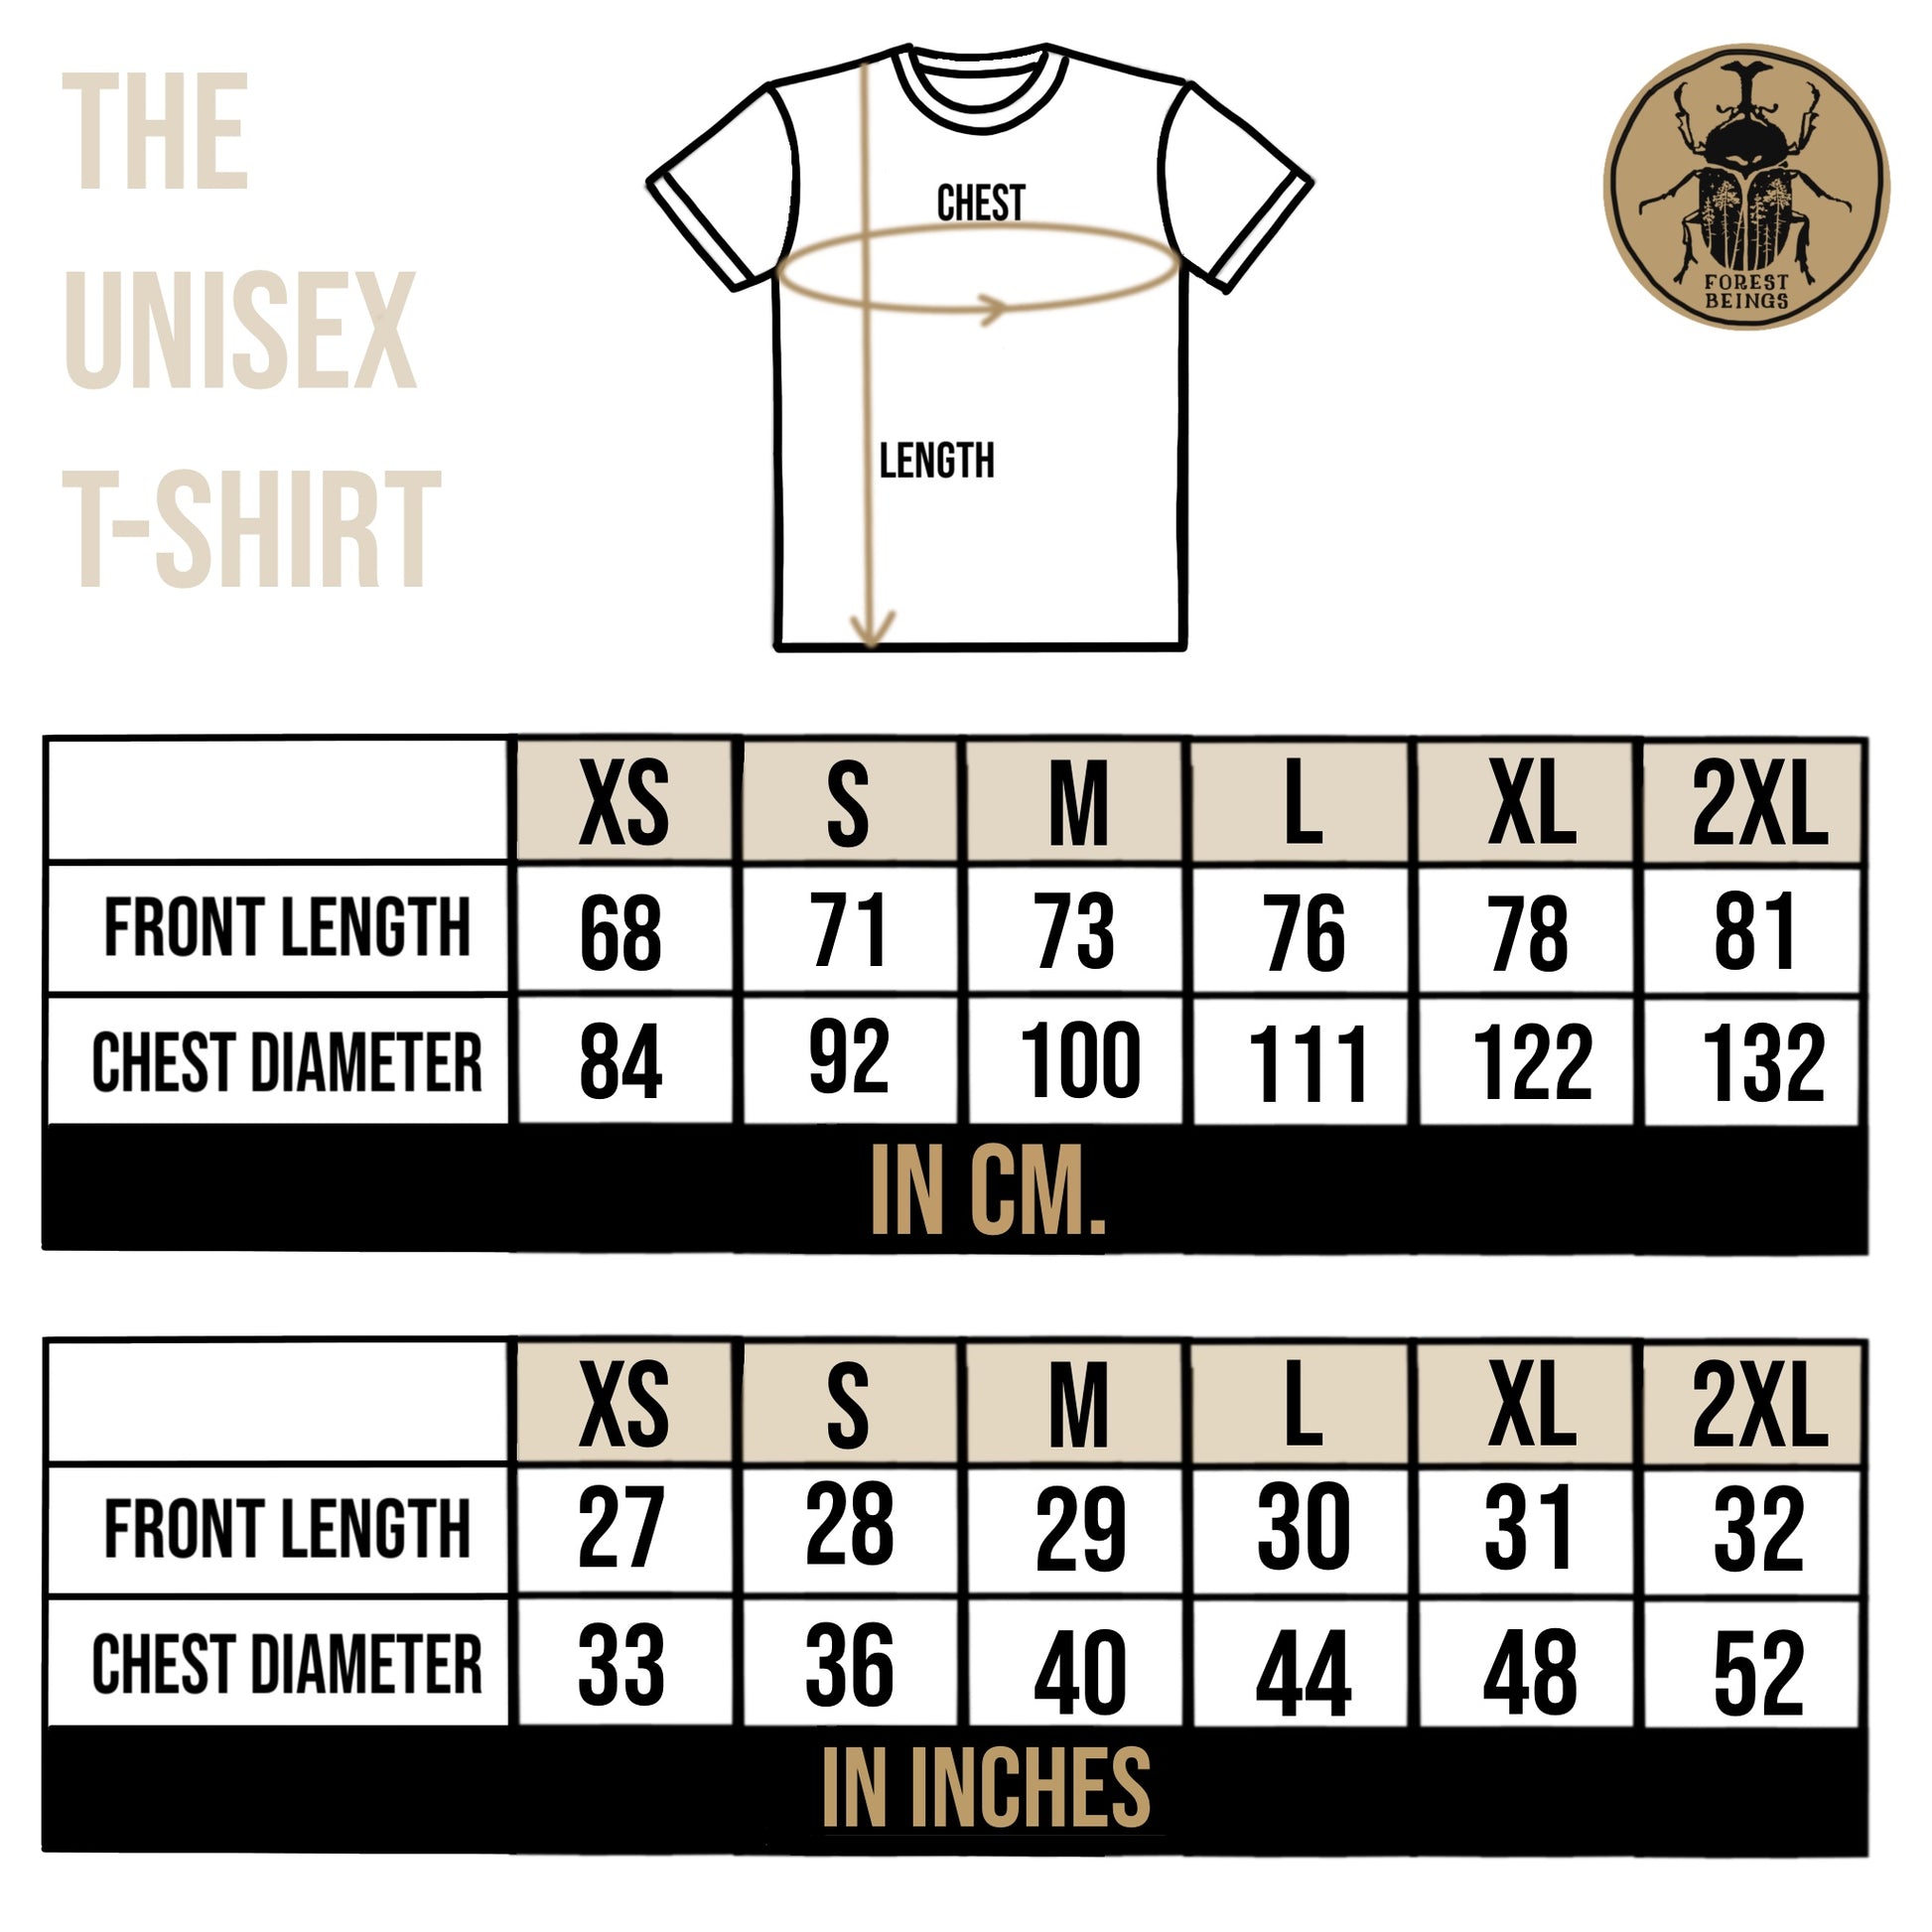 The unisex t-shirt measurement chart shows as follows:  Size XS has length of 68 cm and chest diameter of 84 cm.  Size S has length of 71 cm and chest diameter of 92 cm.  Size M has length of 73 cm and chest diameter of 100 cm.  Size L has length of 76 cm and chest diameter of 111 cm.  Size XL has length of 78 cm and chest diameter of 122 cm.  Size XL has length of 81 cm and chest diameter of 132 cm. 